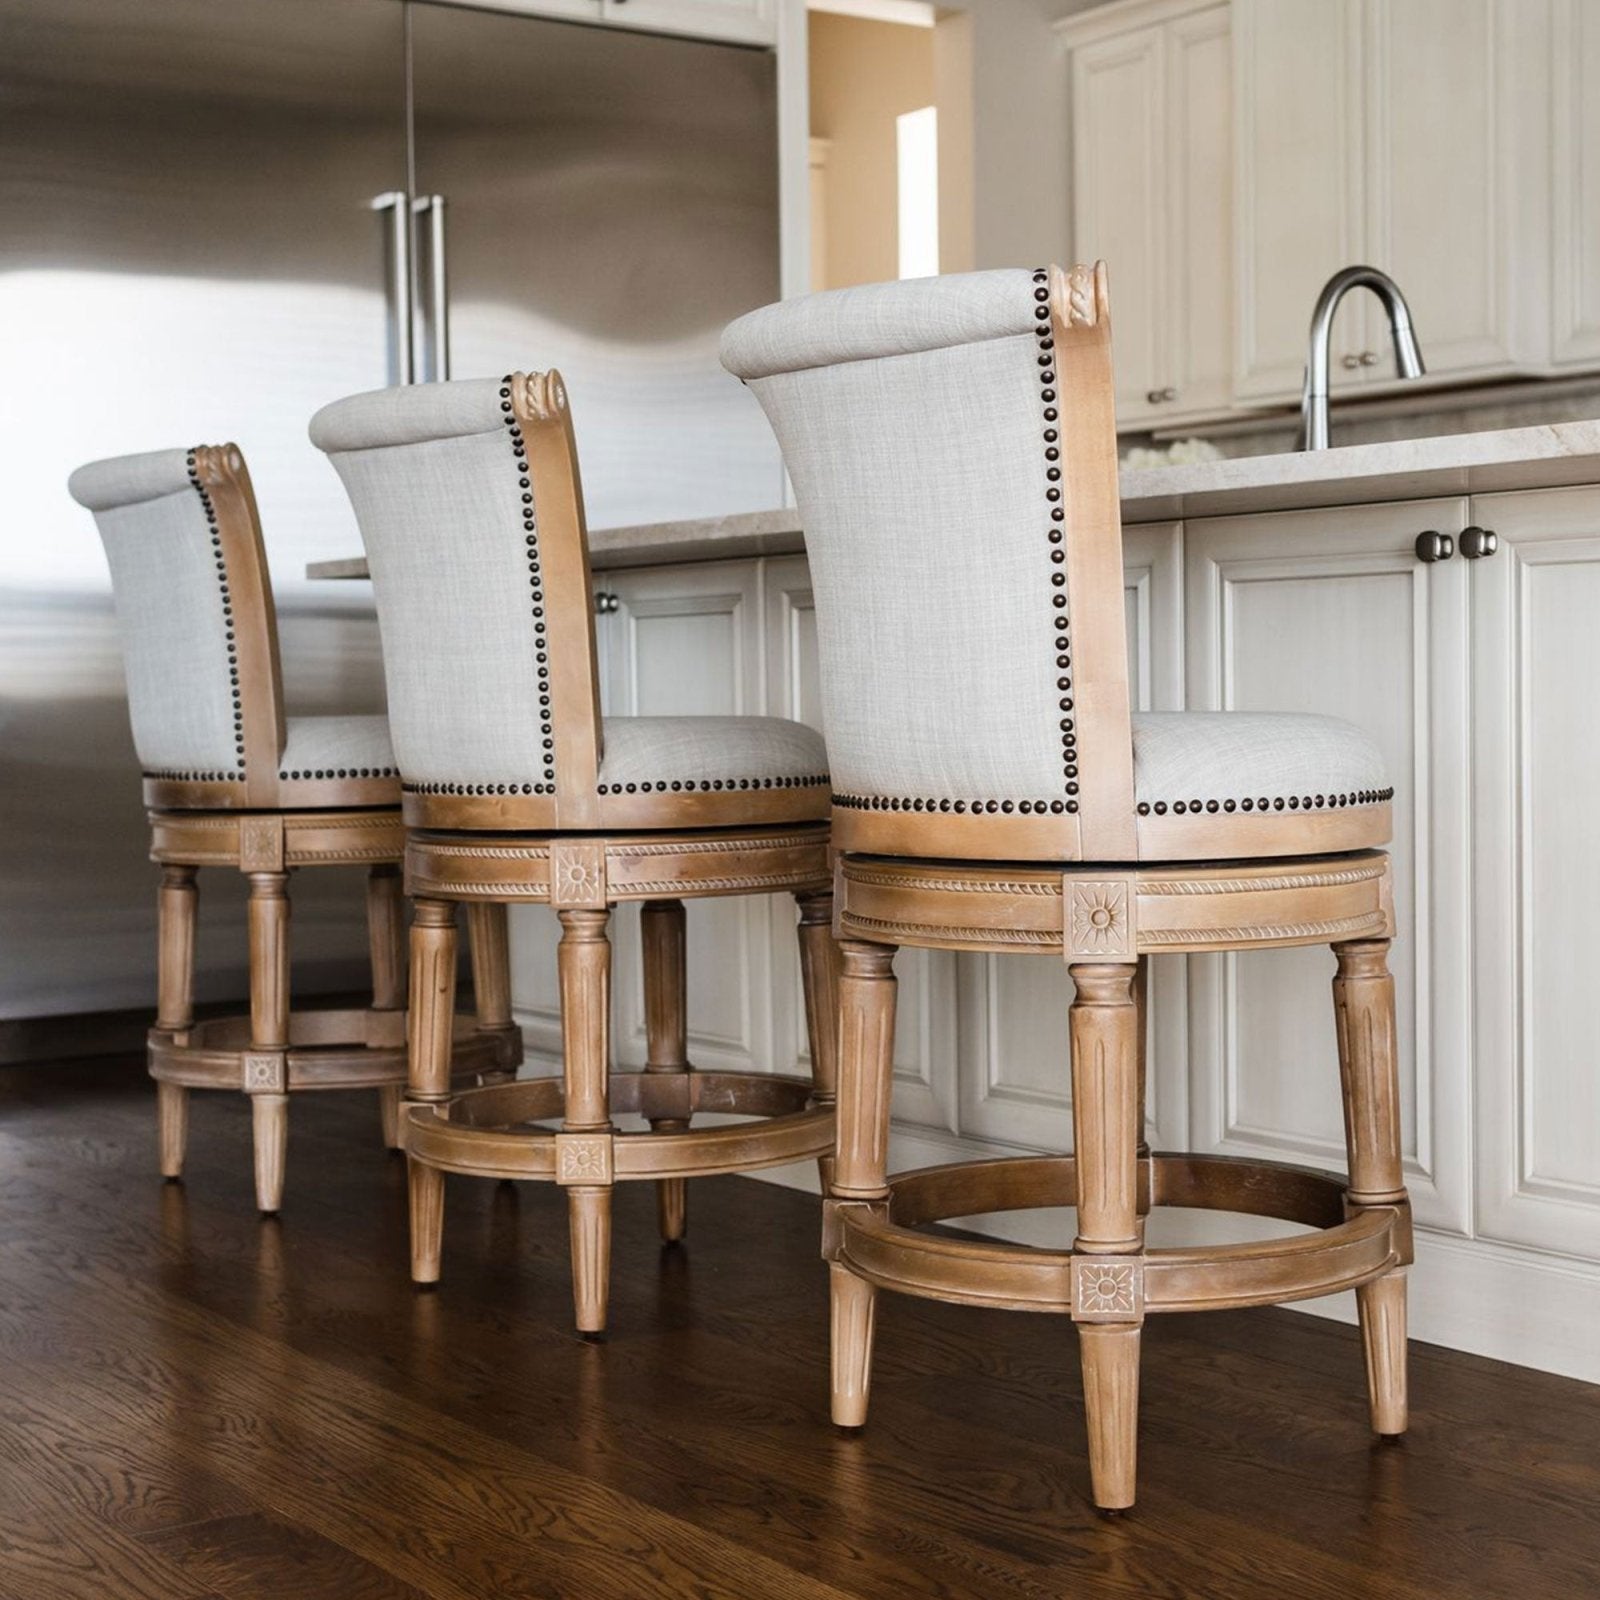 Pullman Bar Stool in Weathered Oak Finish with Sand Color Fabric Upholstery in Stools by Maven Lane